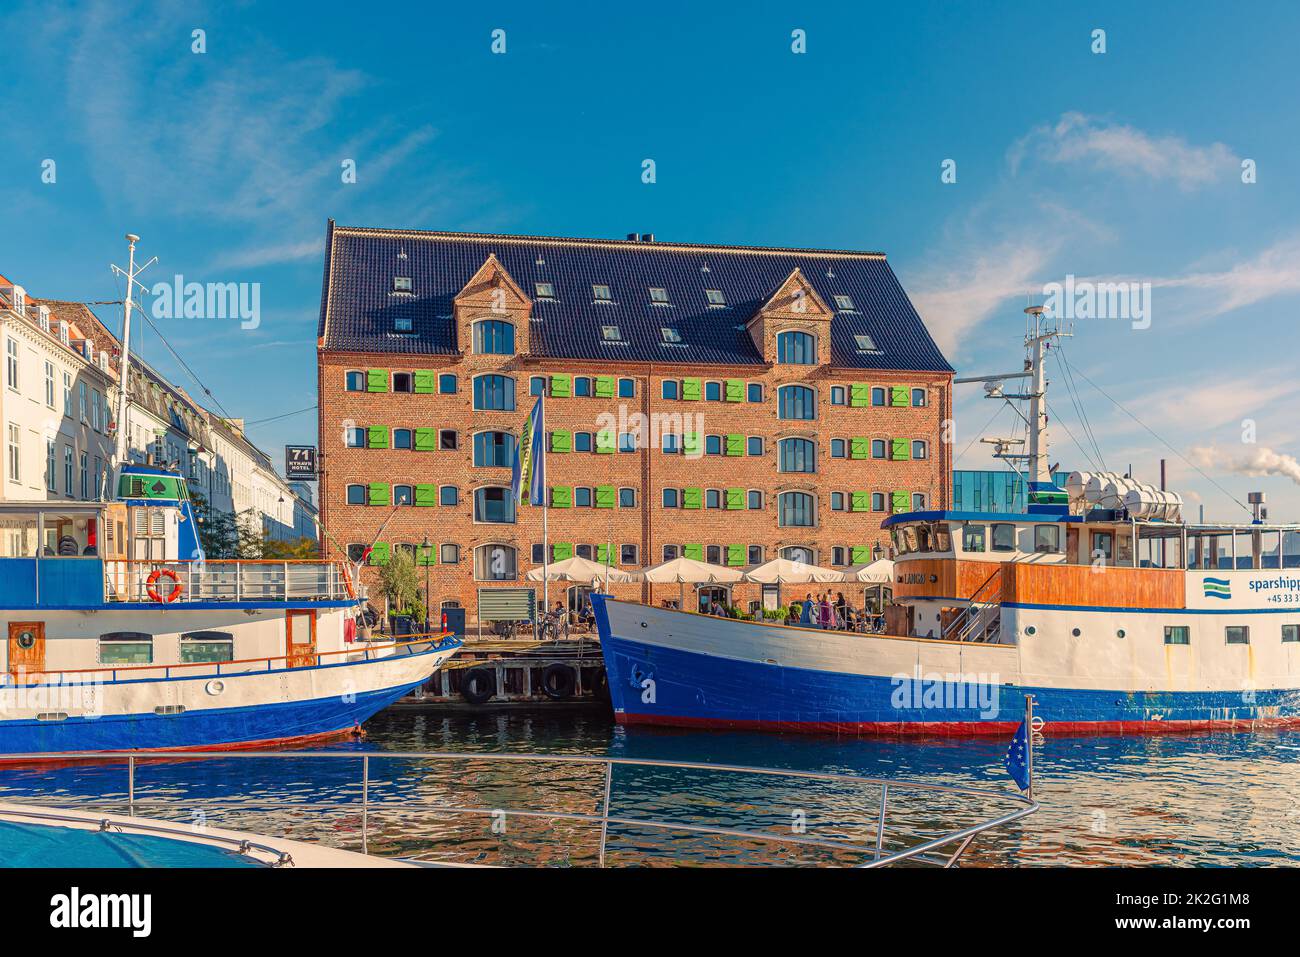 71 Nyhavn Hotel, on the Nyhavn canal, which is located in a old brick warehouse building and several ships in front of it. Copenhagen, Denmark Stock Photo